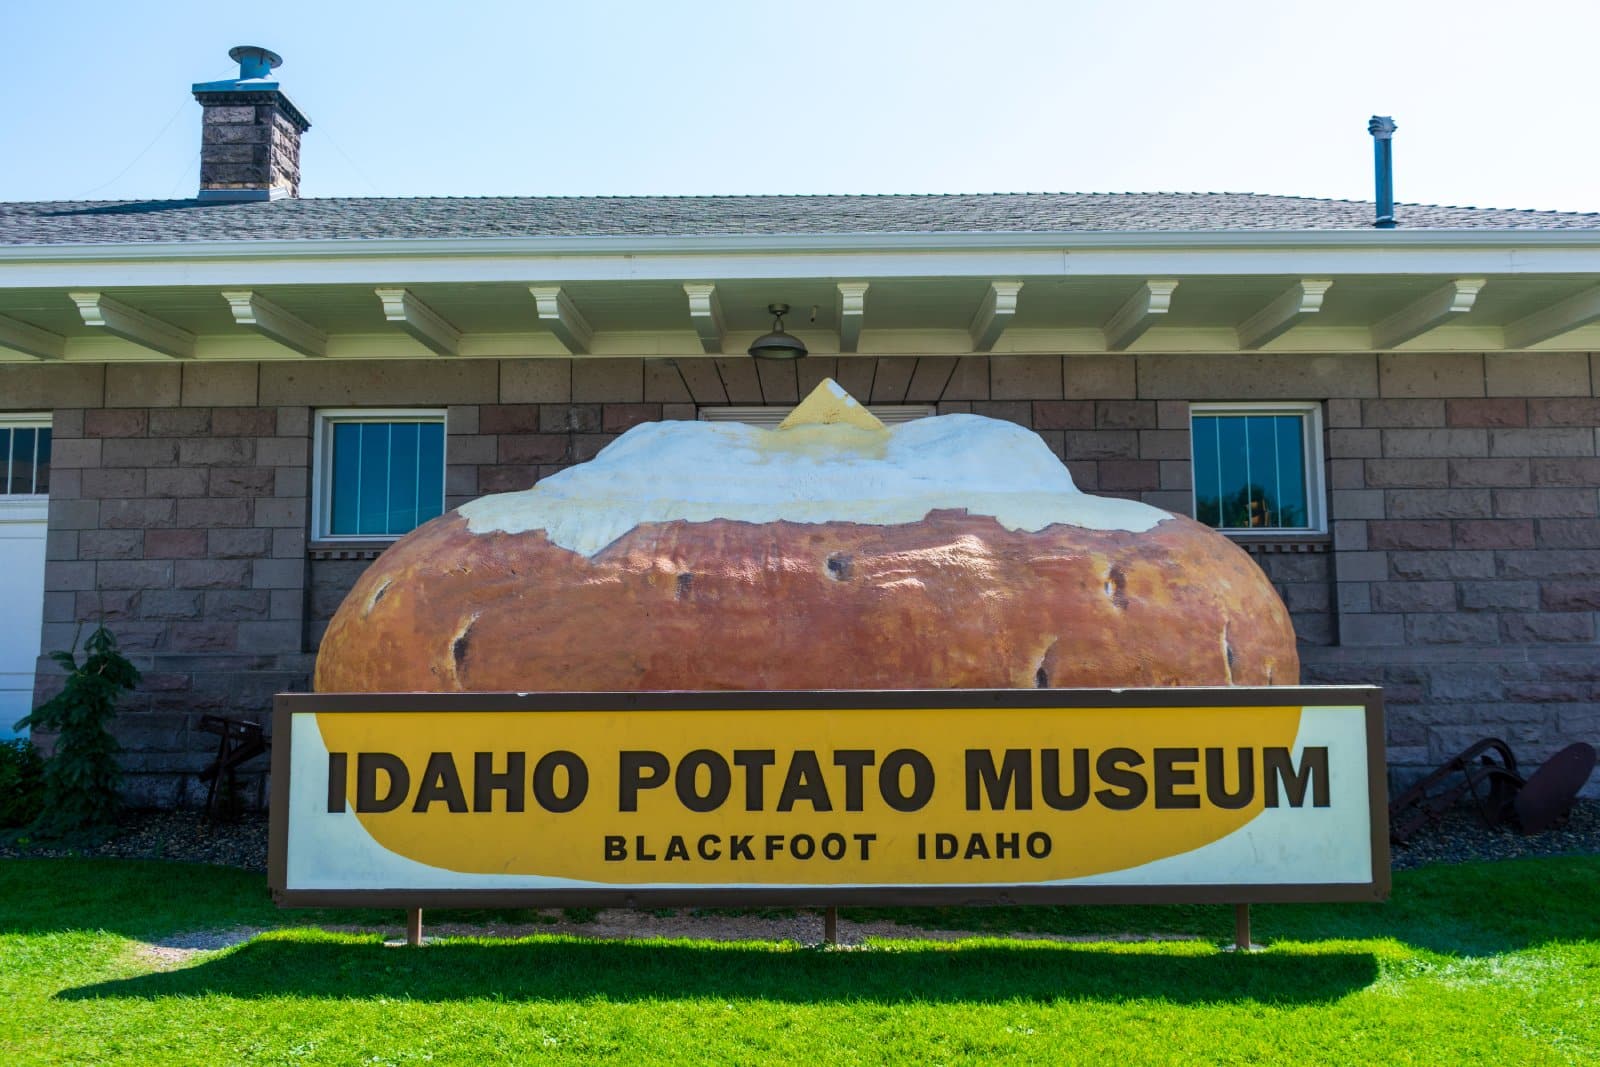 <p class="wp-caption-text">Image Credit: Shutterstock / Michael Vi</p>  <p>Yes, it’s a museum dedicated to potatoes, and it’s as quirky as it sounds. Entry is cheap, and the potato ice cream is a must-try. It’s a light-hearted stop that’s easy on the wallet.</p>